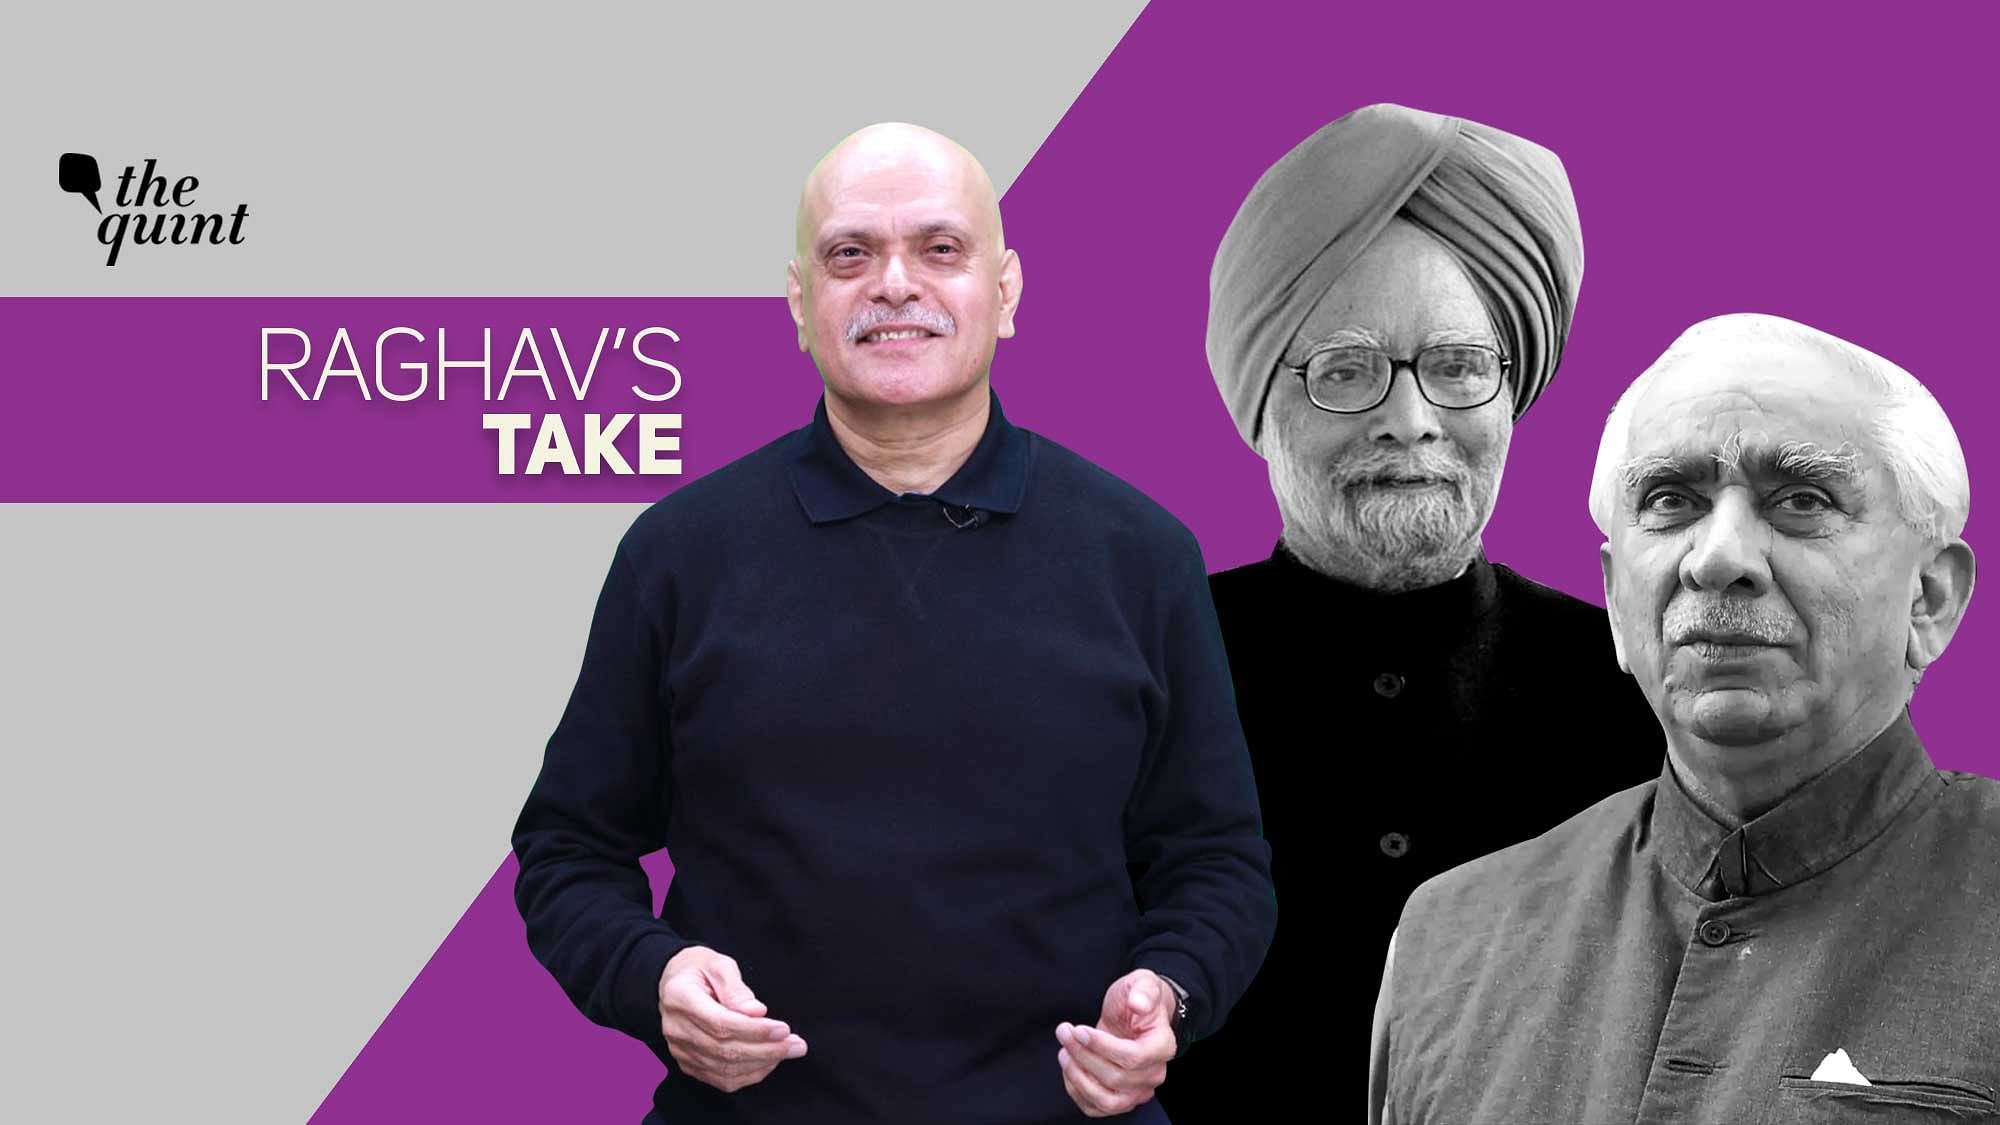 Image of Raghav Bahl (centre), Jaswant Singh (extreme R) and Dr Manmohan Singh used for representational purposes.